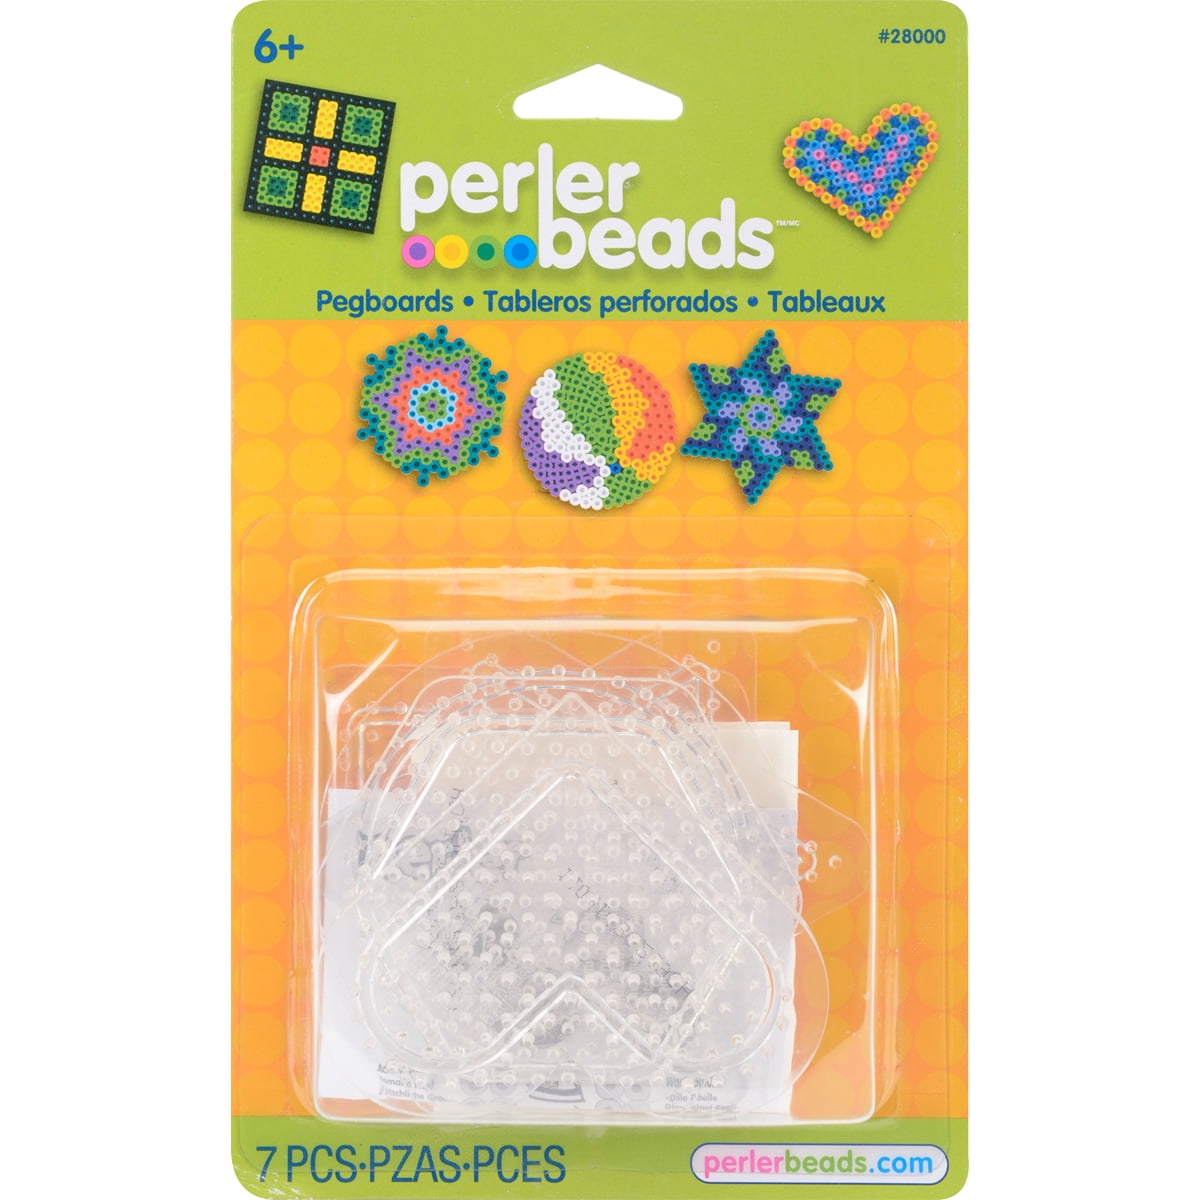 Perler Bead Pegboards, Dedoot 18 Pieces 5mm Fuse Bead Board Clear